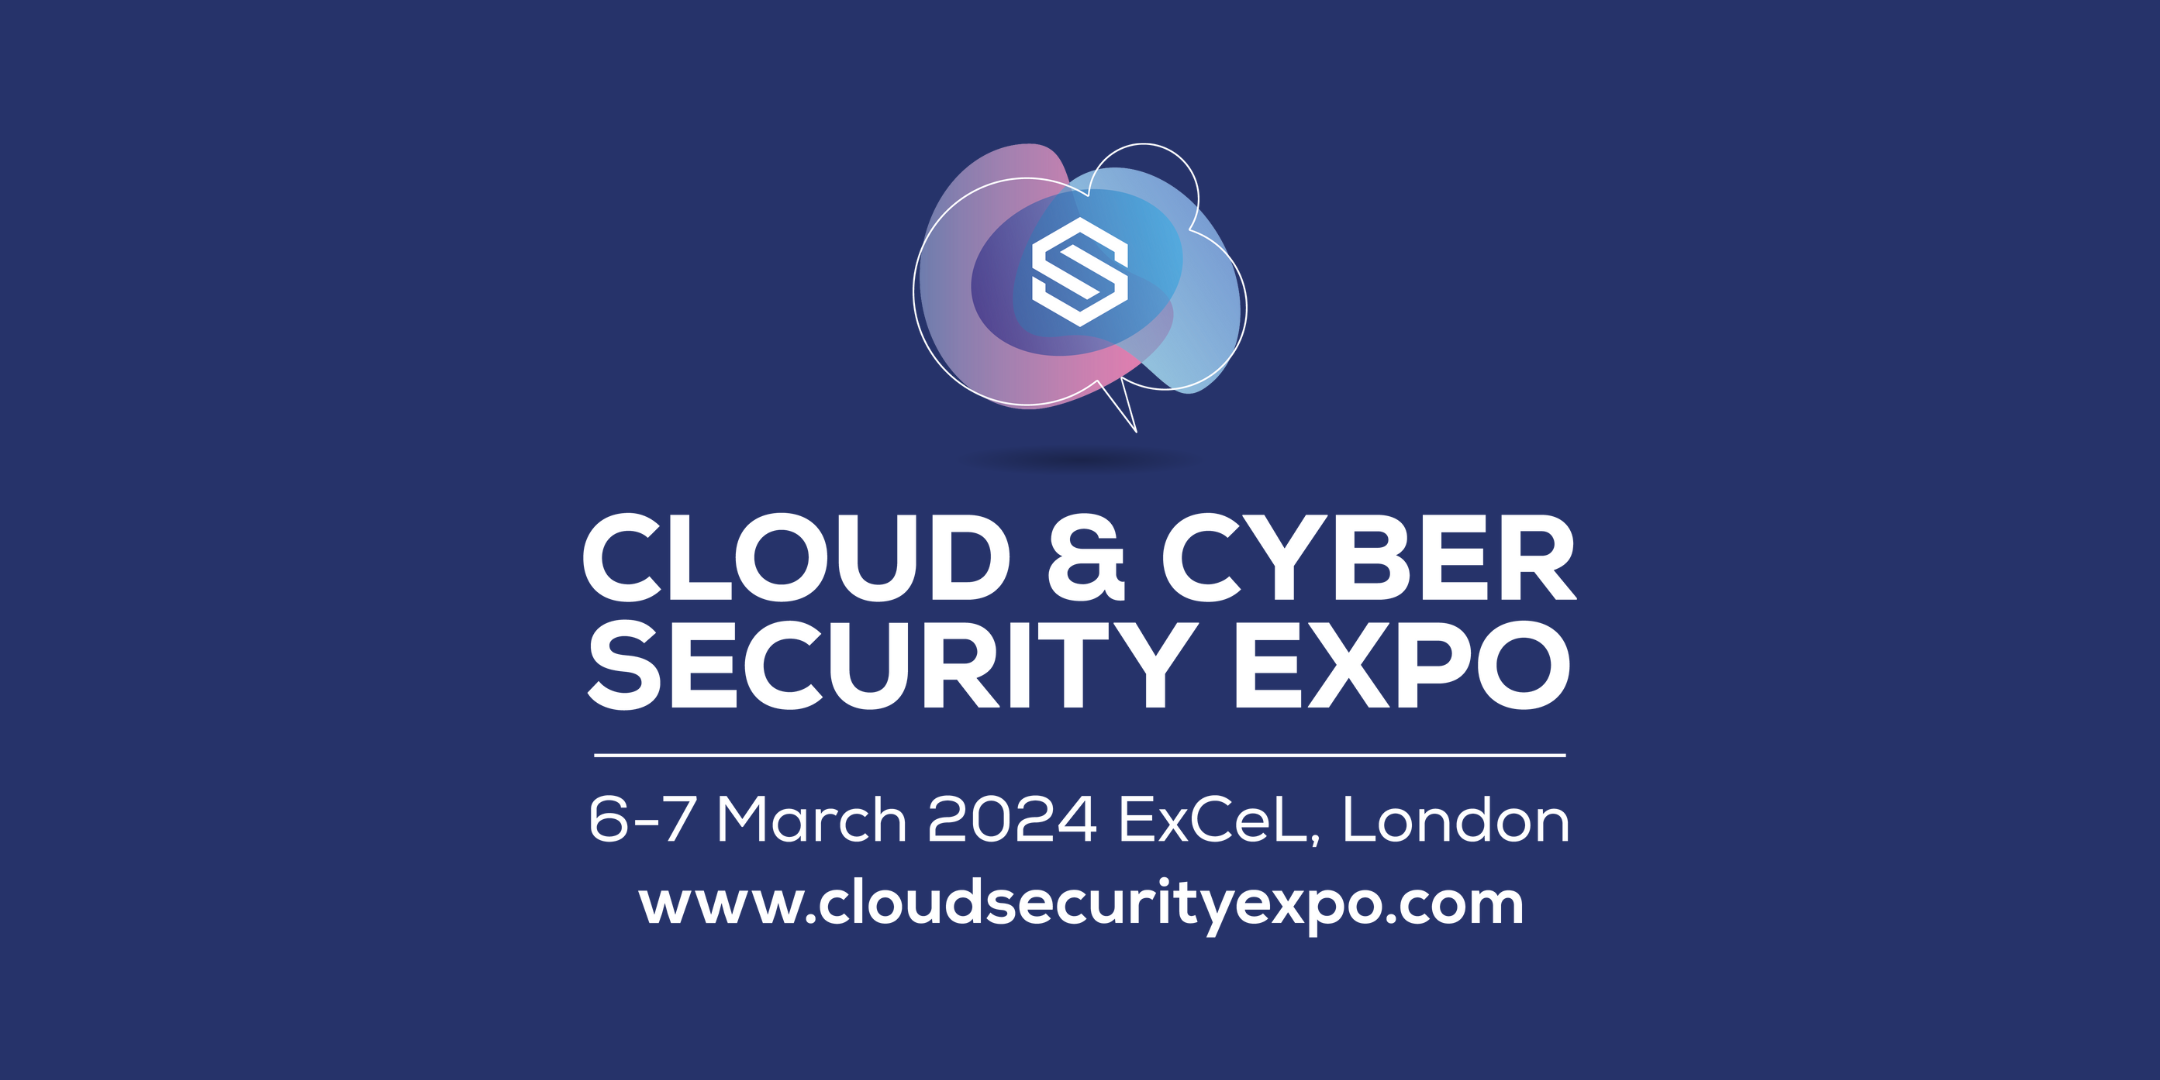 Cloud & Cyber Security Expo 2024